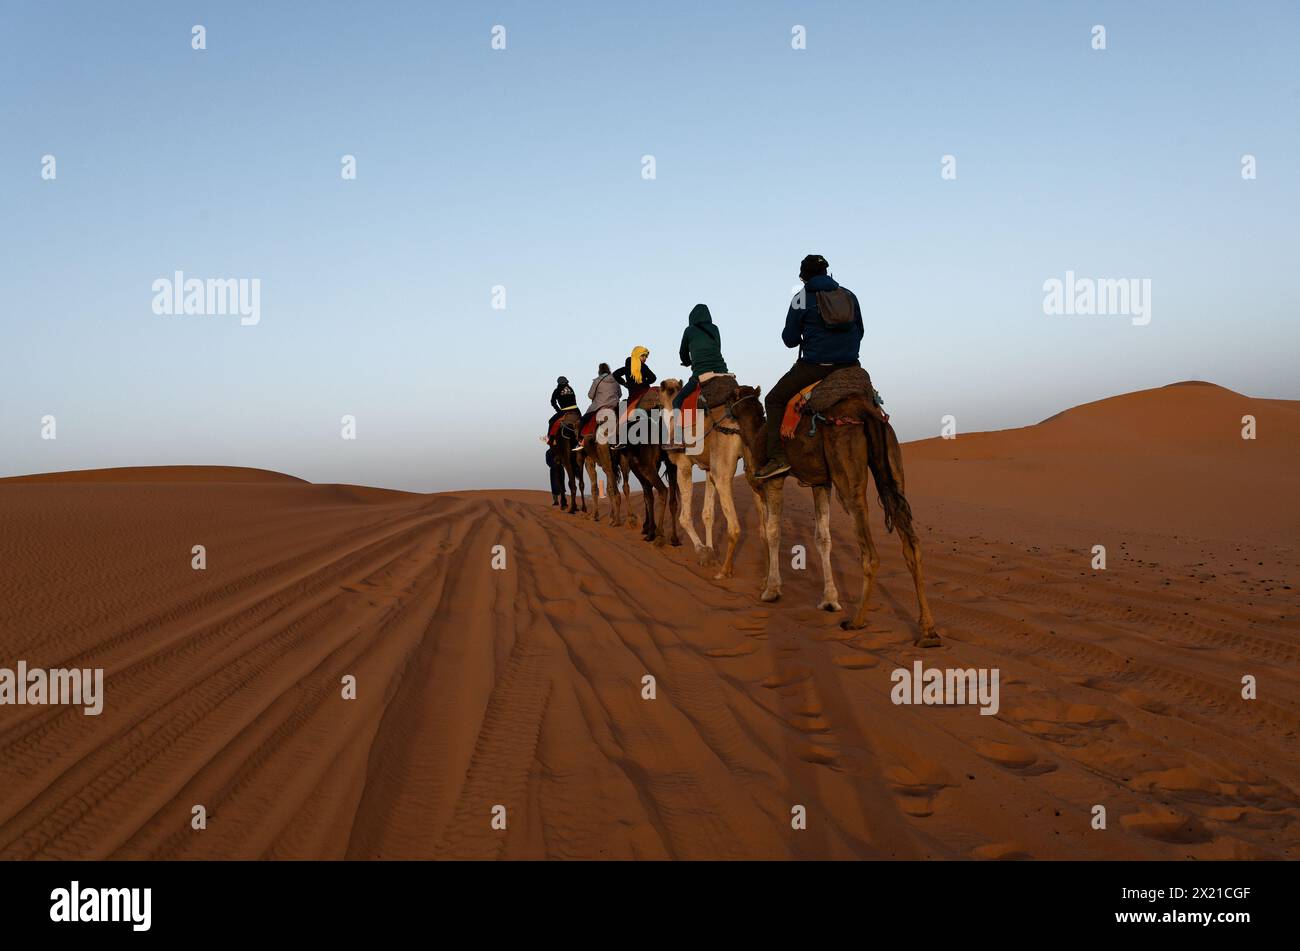 Camel caravan and riders trekking away, viewed from a low angle; the rising sun backlights the scene, casting gentle shadows on the golden sand. Stock Photo